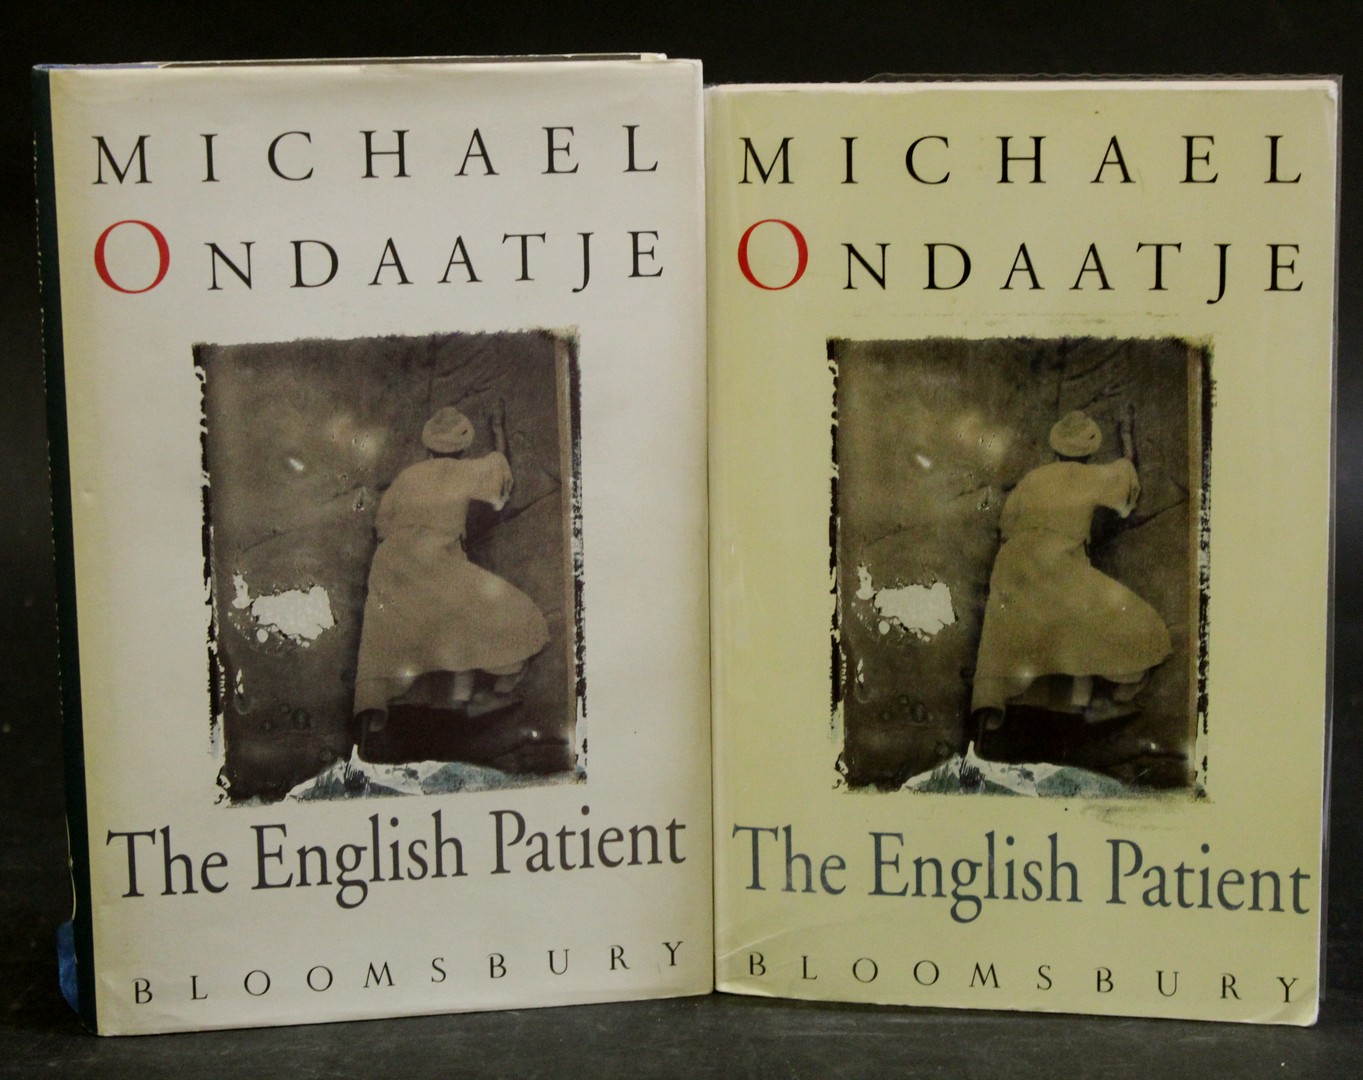 MICHAEL ONDAATJE: THE ENGLISH PATIENT, London, Bloomsbury, 1992, 1st edition, original cloth, dust